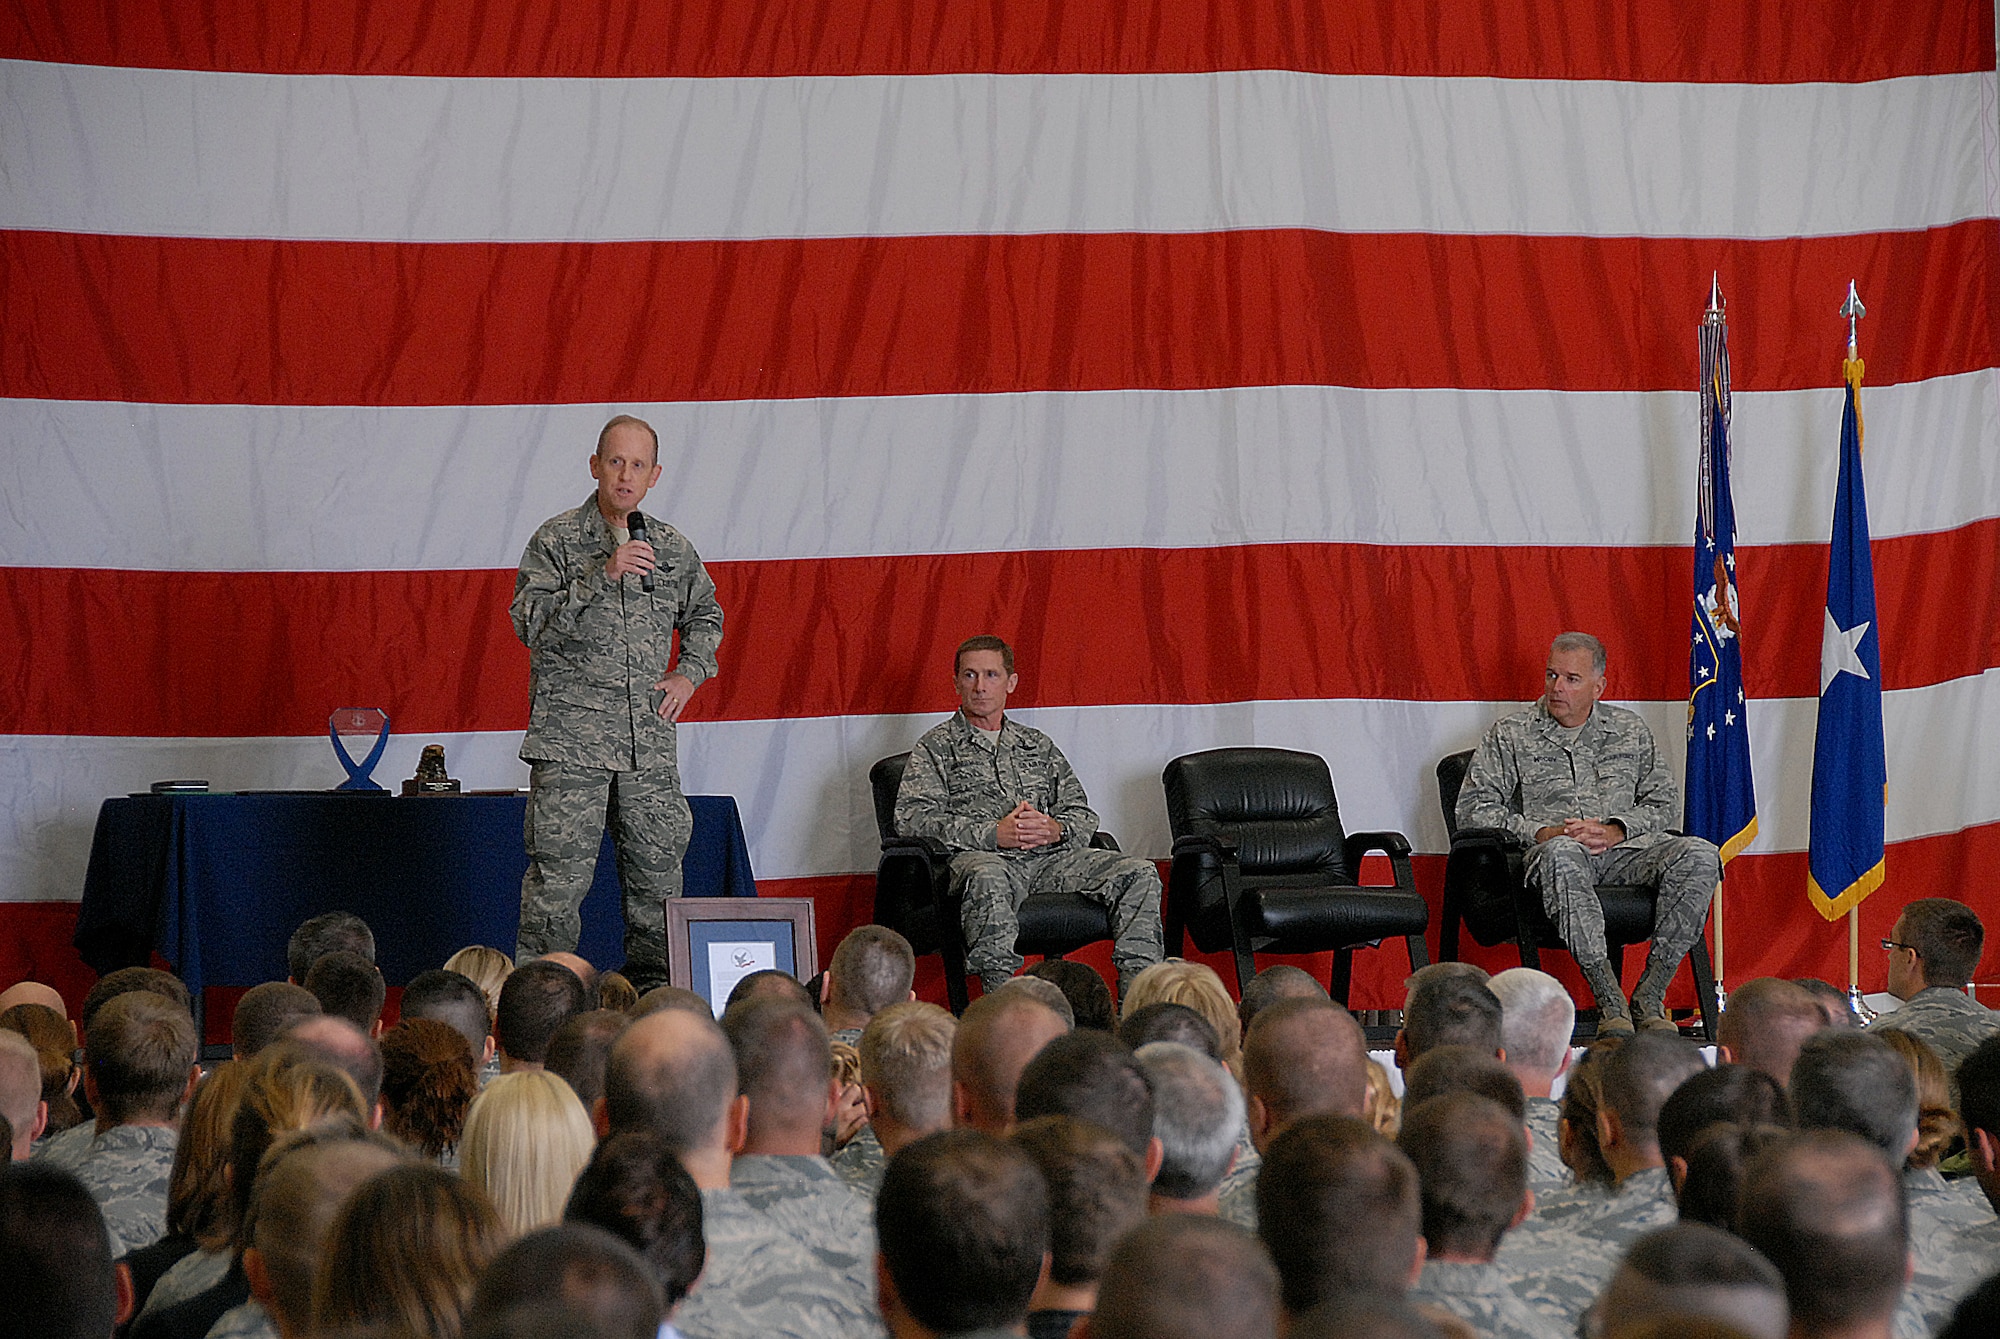 Brigadier General Donald Dunbar, Wisconsin National Guard adjutant general, addresses more than 350 members of the 115th Fighter Wing at the unit's first-ever Hometown Heroes Salute ceremony.  The National Guard program honors recognizes Airmen who deployed for more than 30 consecutive days for Operations Noble Eagle, Enduring Freedom and Iraqi Freedom and all other contingency operations.  Airman's families and centers of influence were also recognized. (U.S. Air Force photo by Tech. Sgt. Ashley Bell)